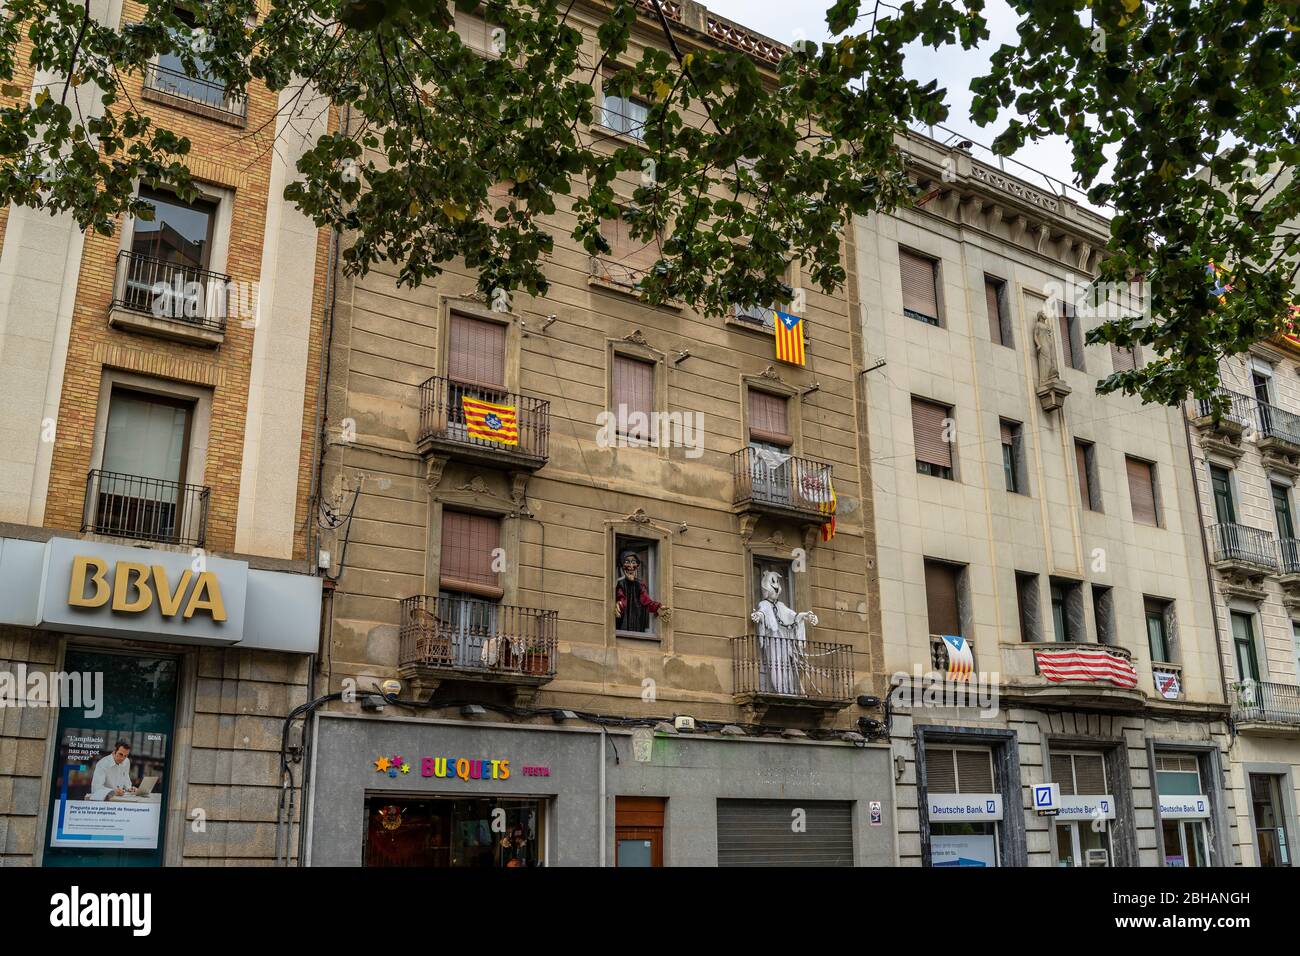 Europe, Spain, Catalonia, Girona, sign of the Catalan independence movement in Girona Stock Photo